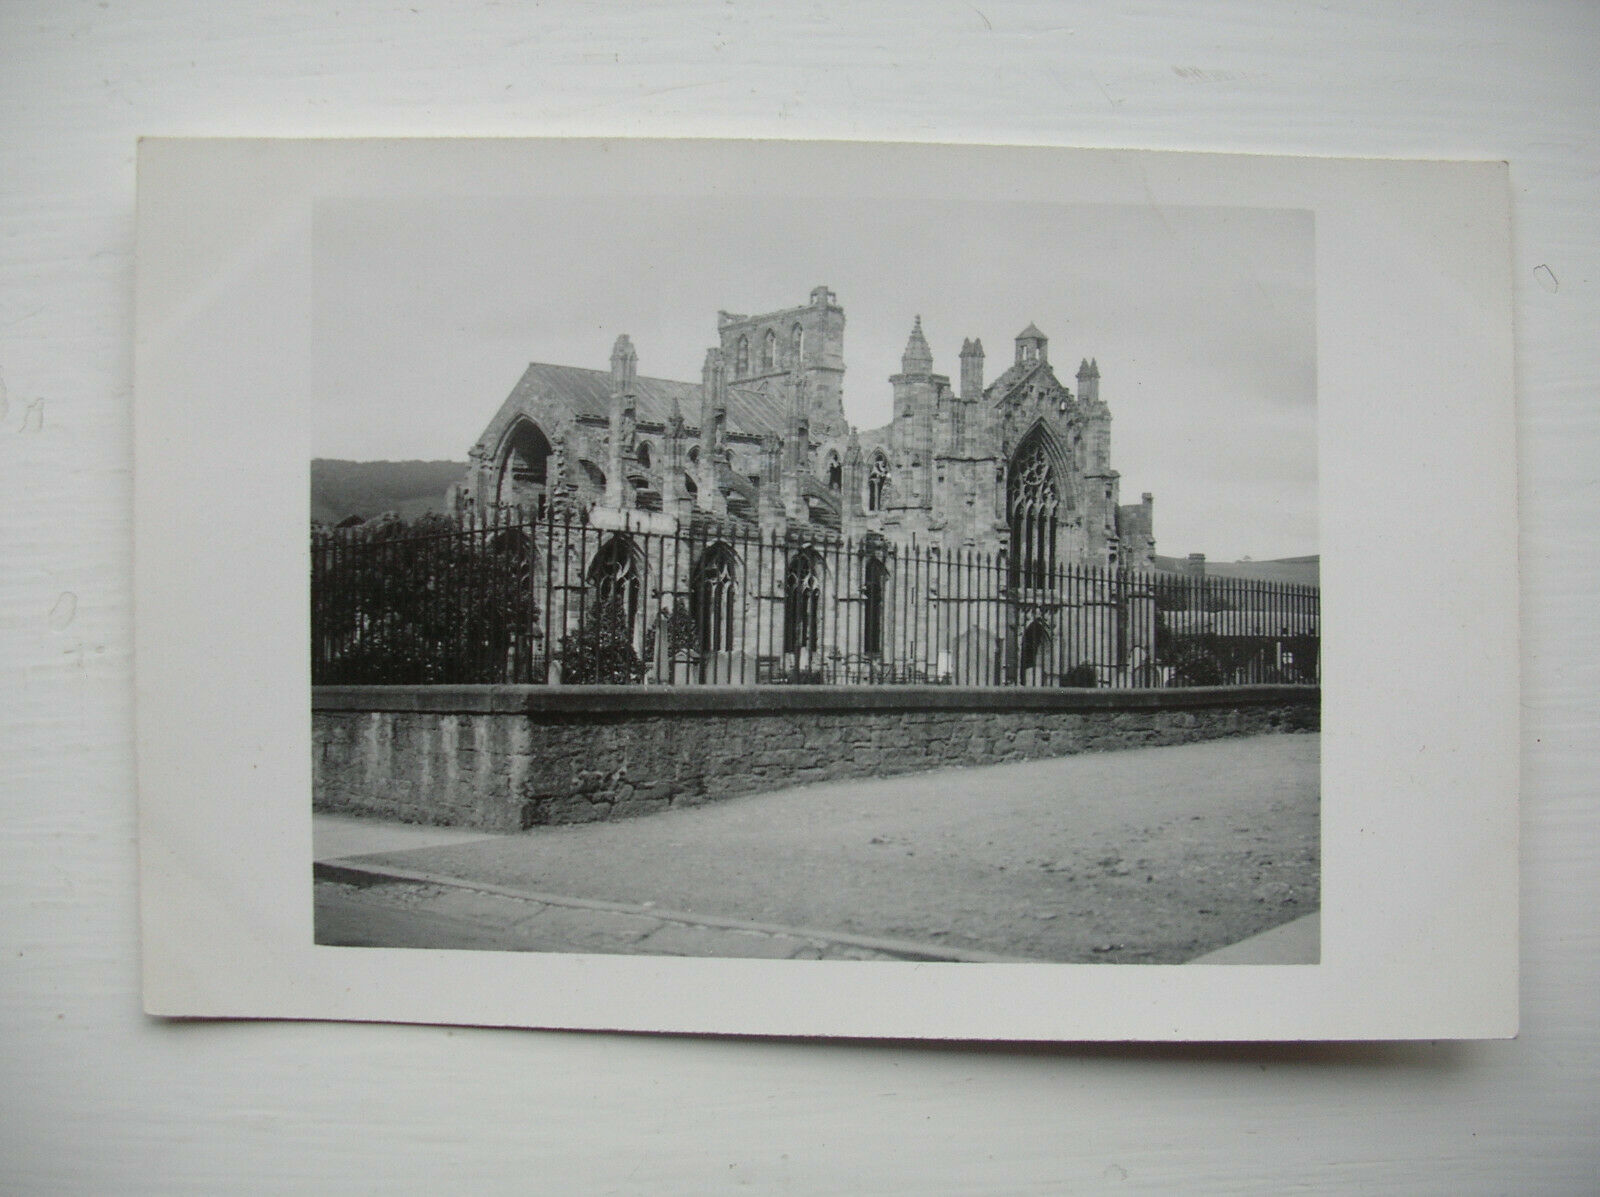 House Clearance - Melrose Abbey, Roxburghshire. (Early 1900s)